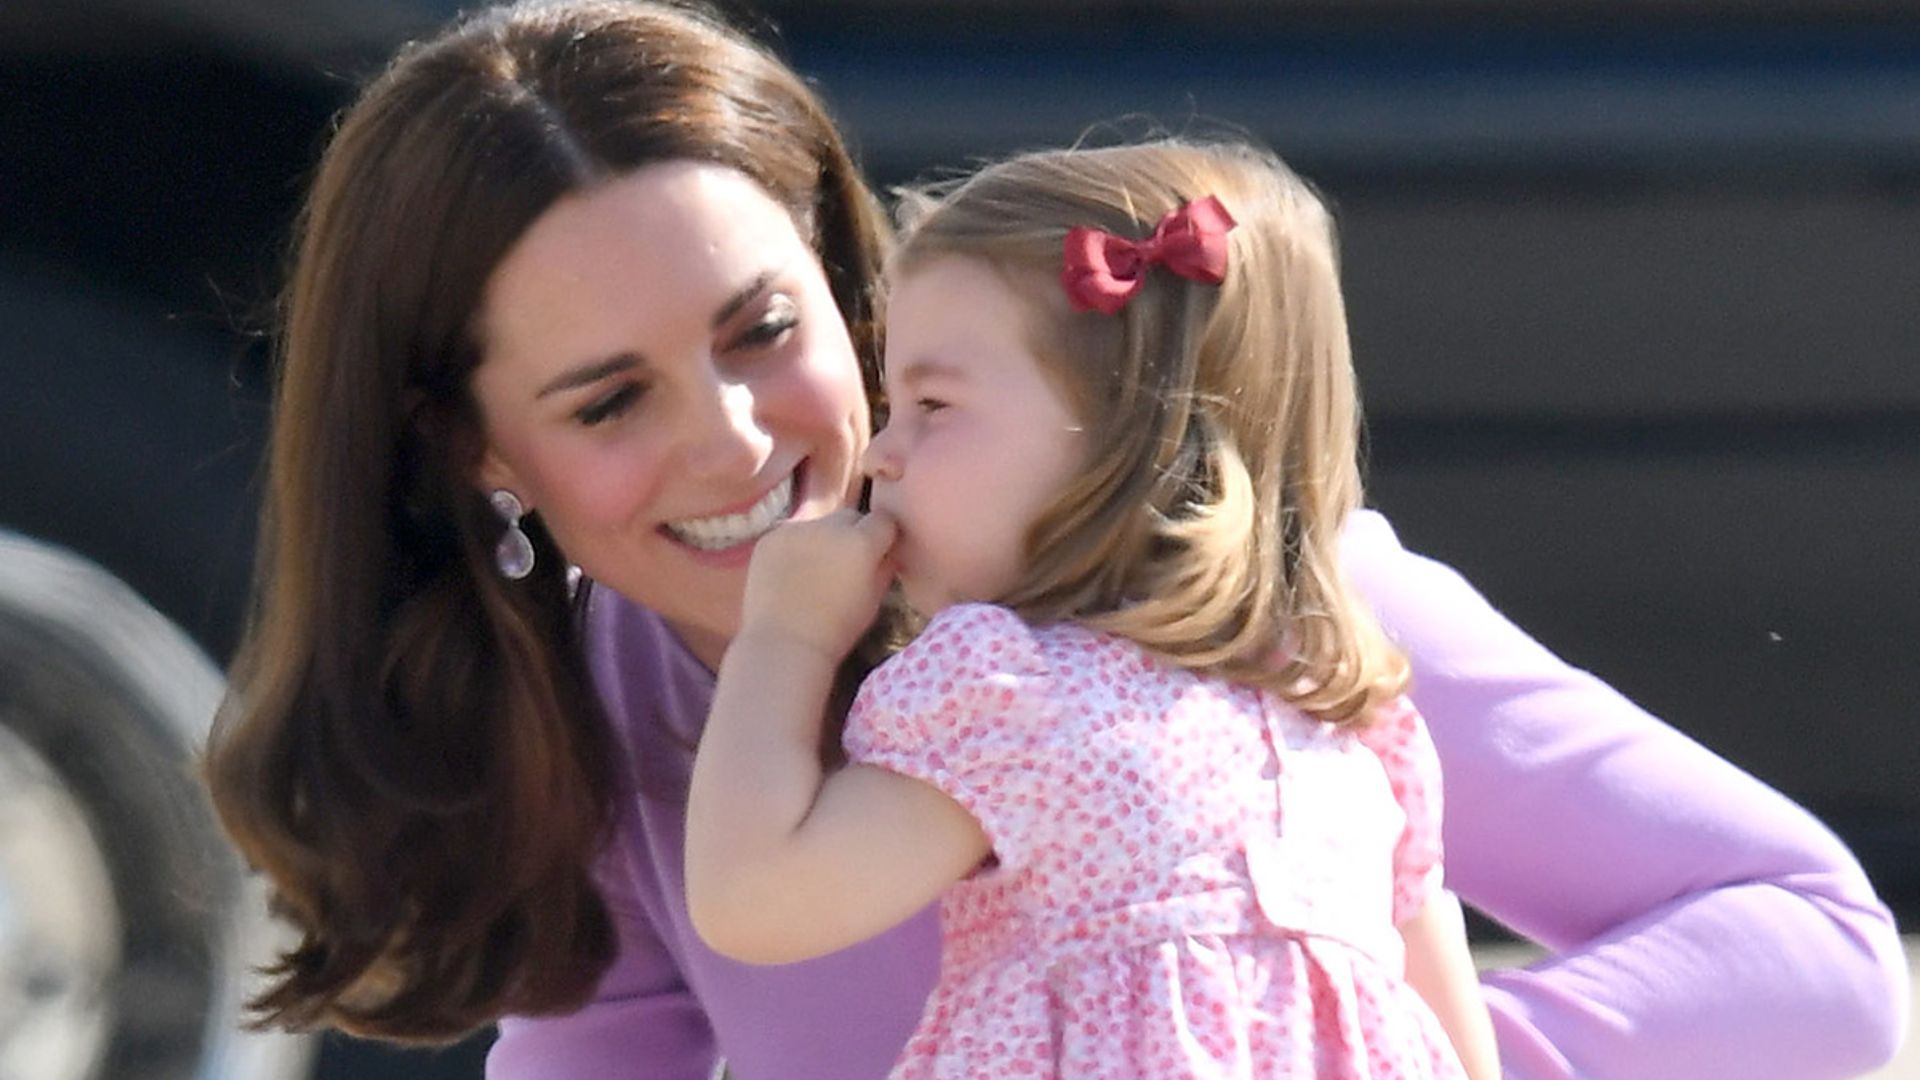 Love Princess Charlotte's pink party dress? Get down to Morrisons ASAP